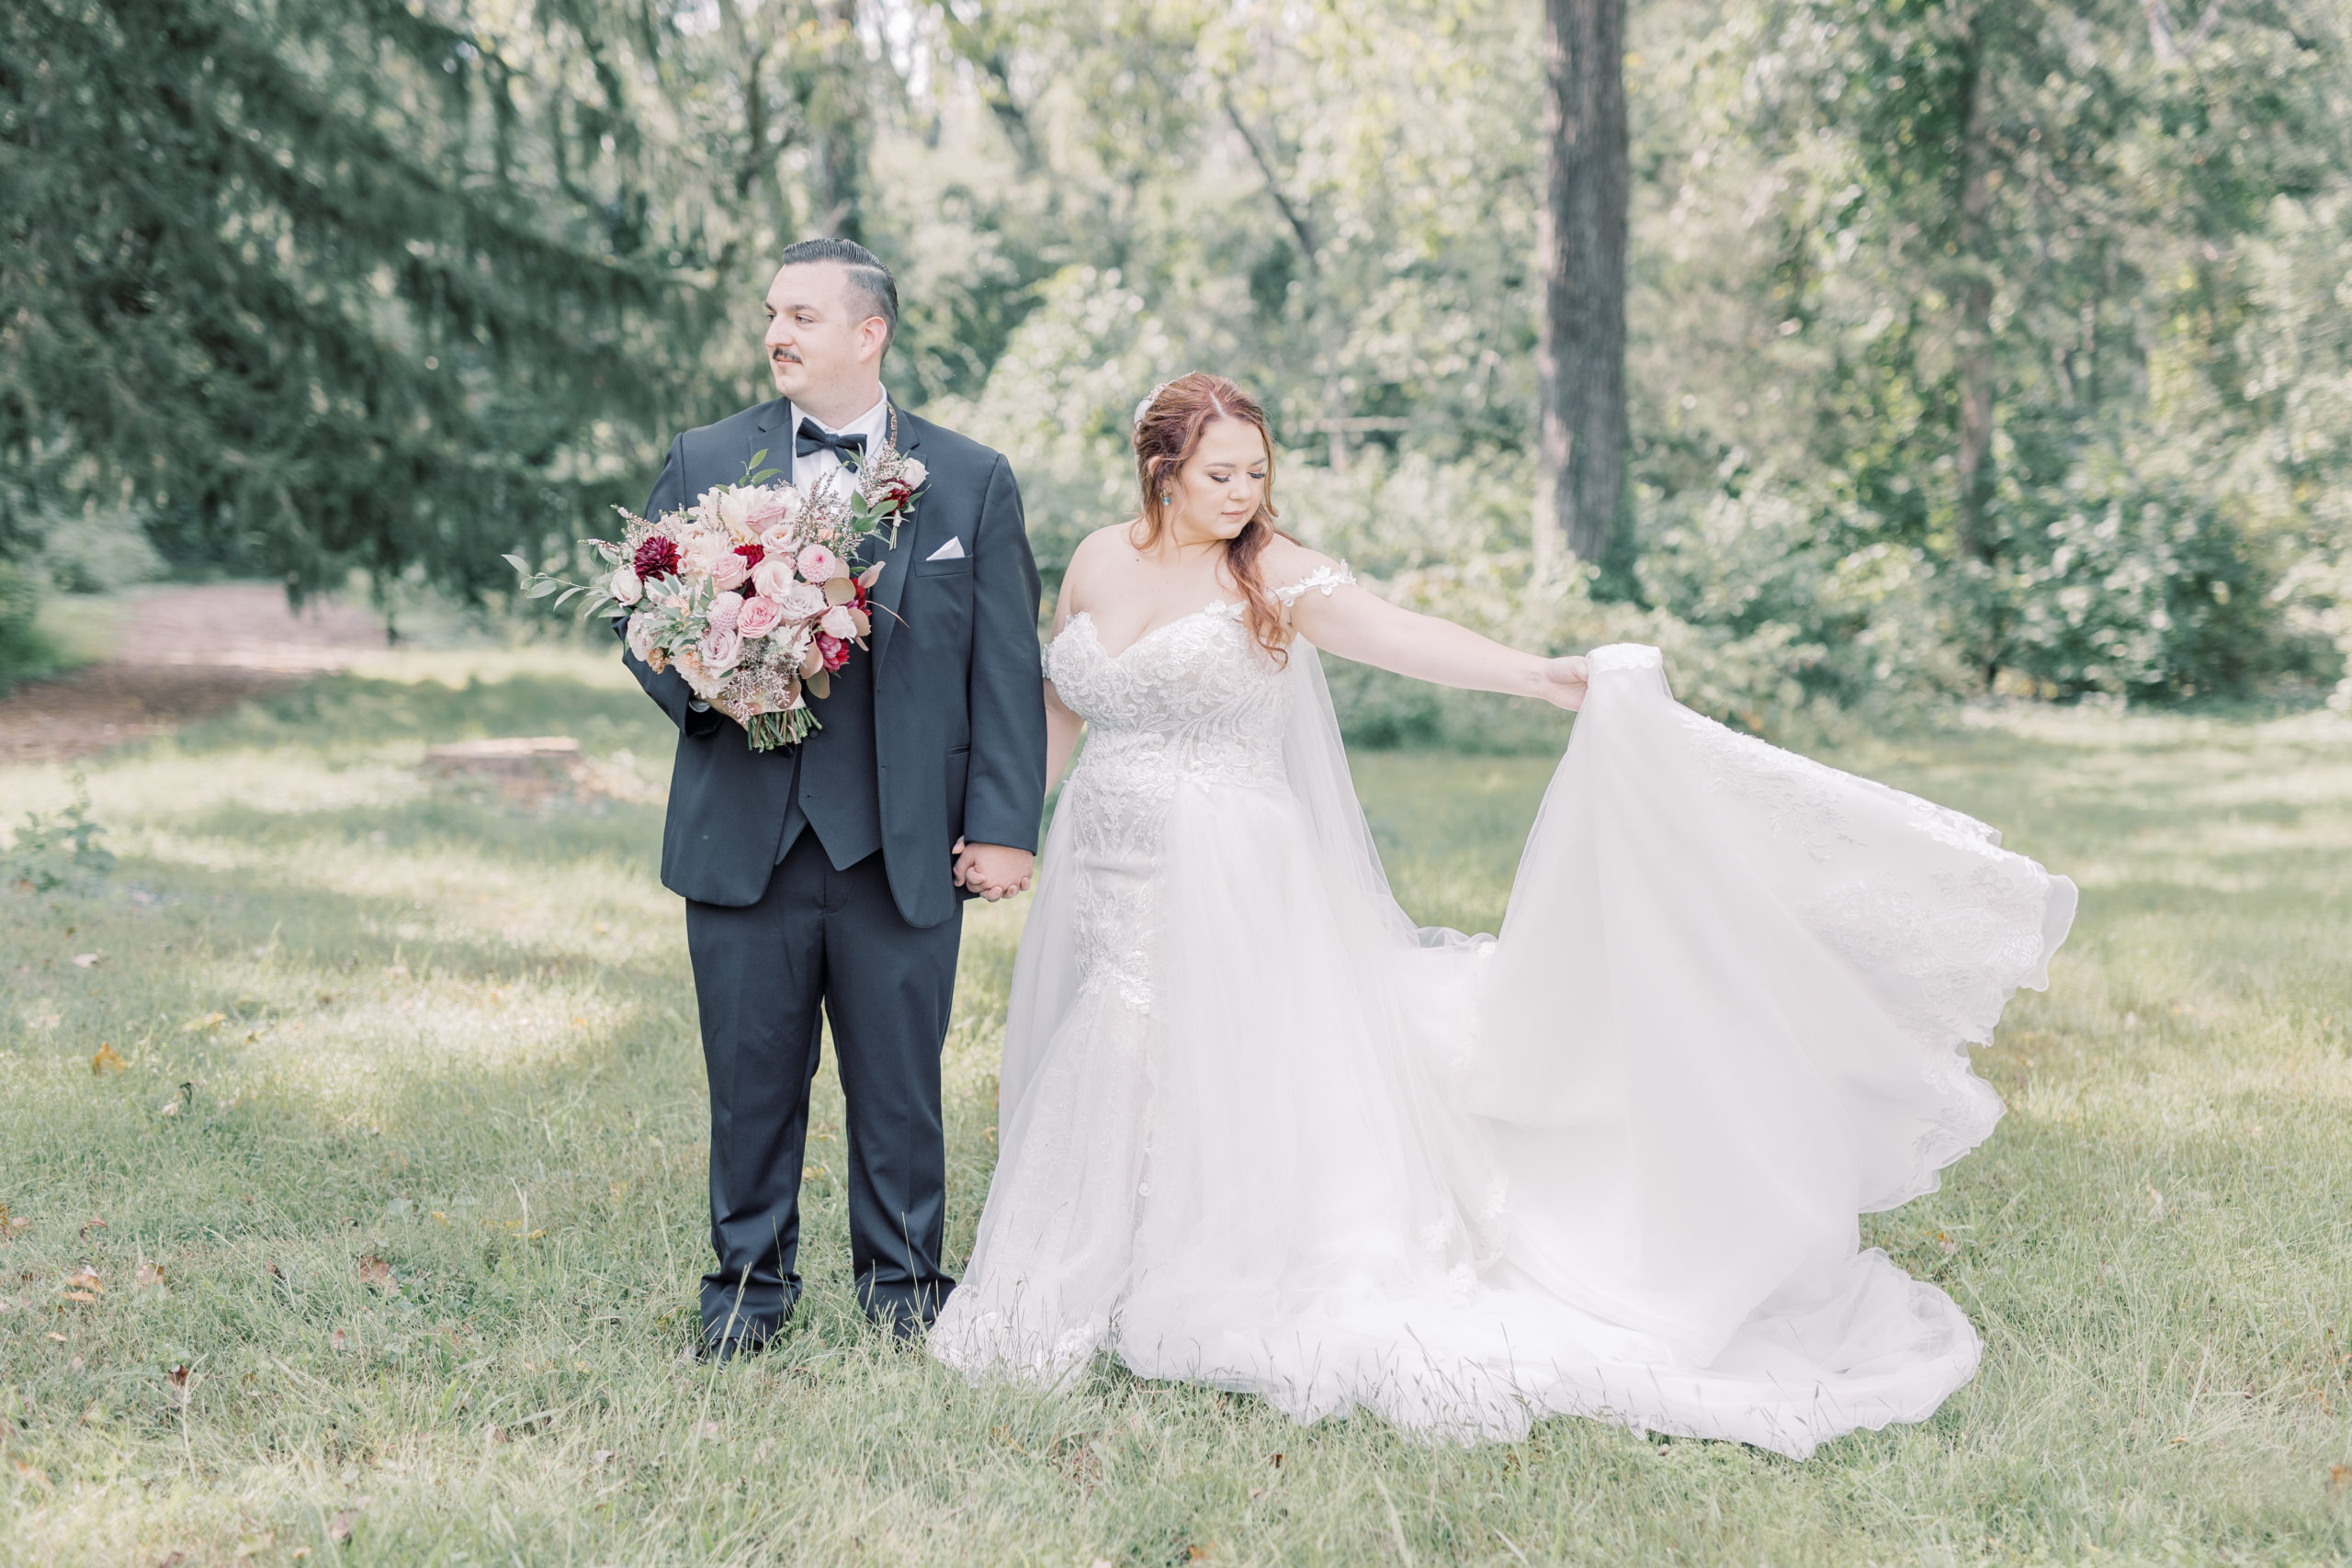 Bride and Groom standing next to each other in a tall grassy field holding hands on their wedding day. This light and airy wedding photo shows the bride spinning her dress while her groom holds her romantic bouquet of flowers. 